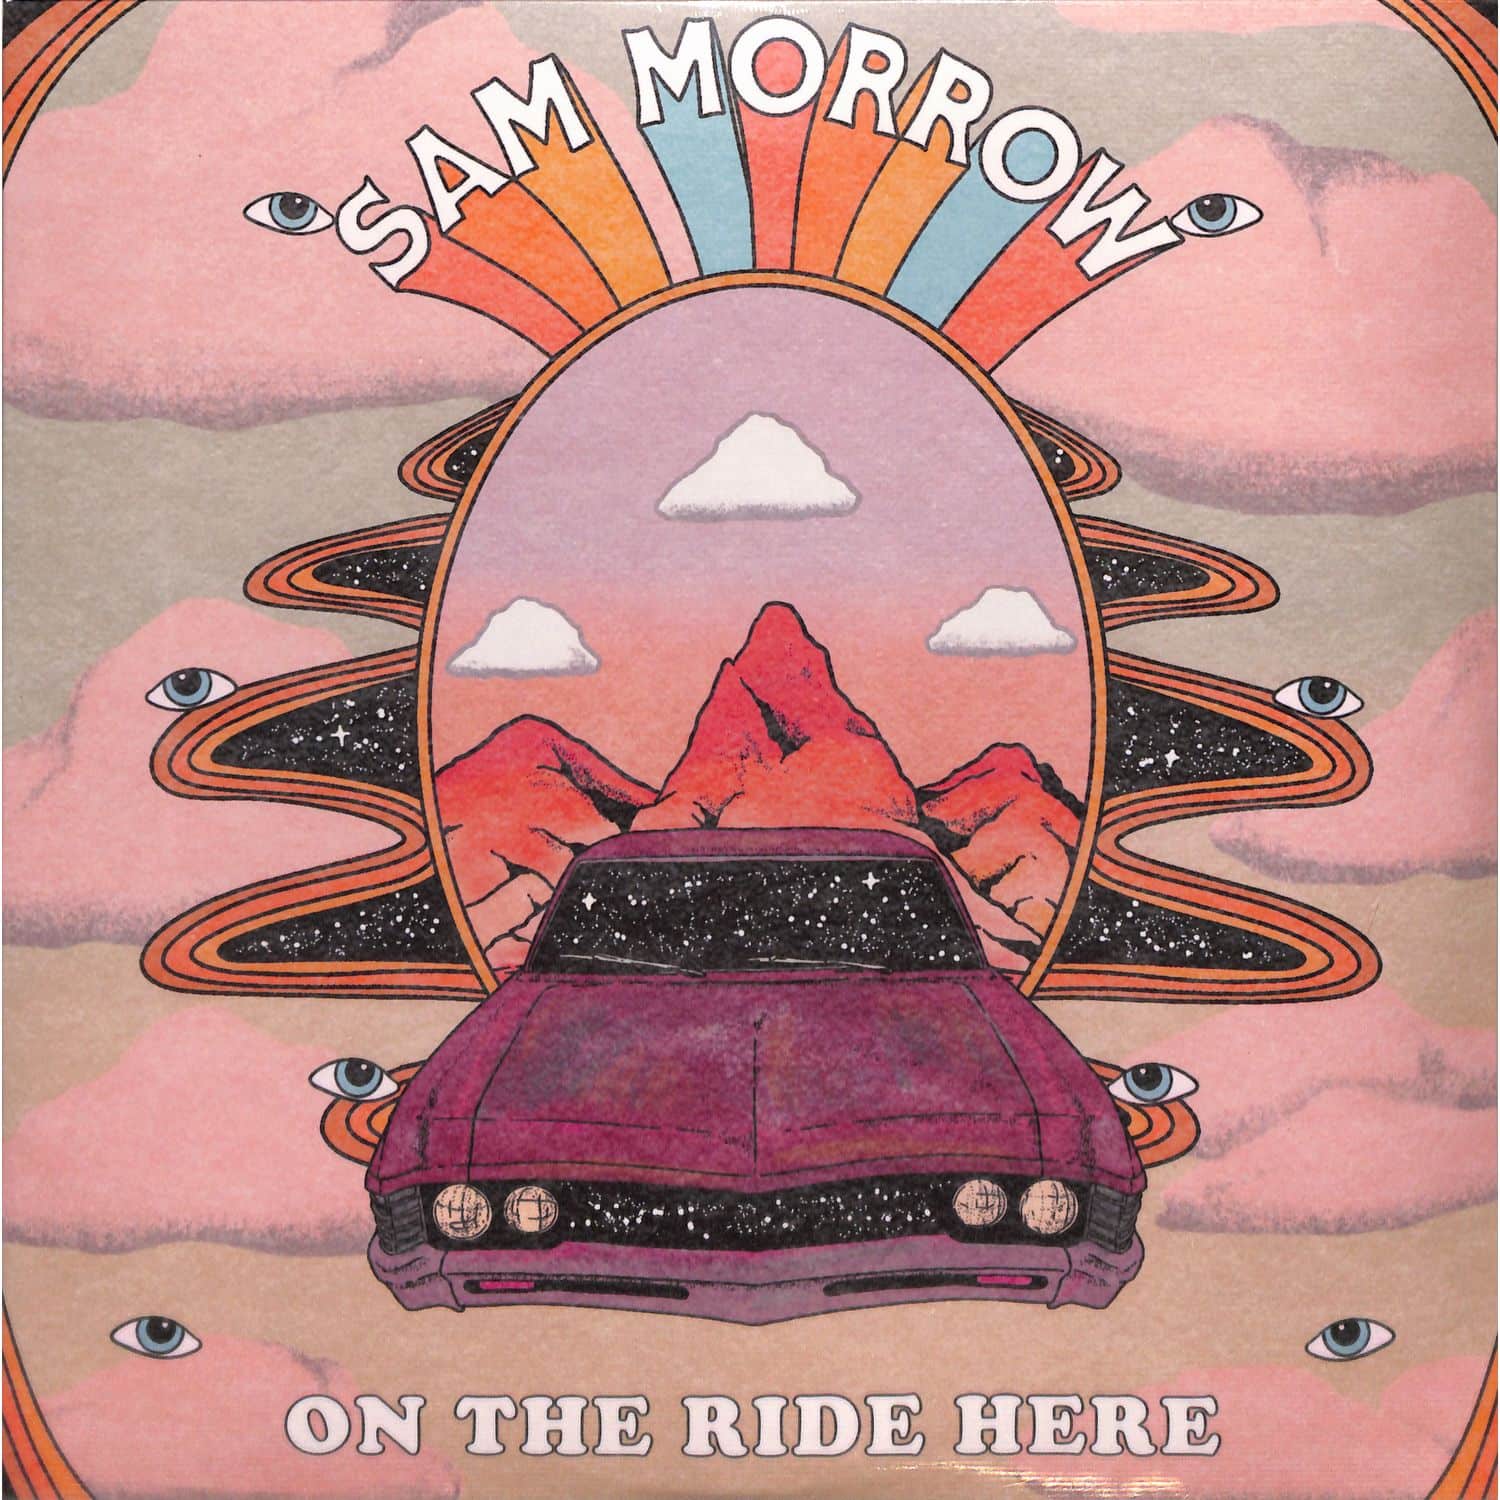 Sam Morrow - ON THE RIDE HERE 